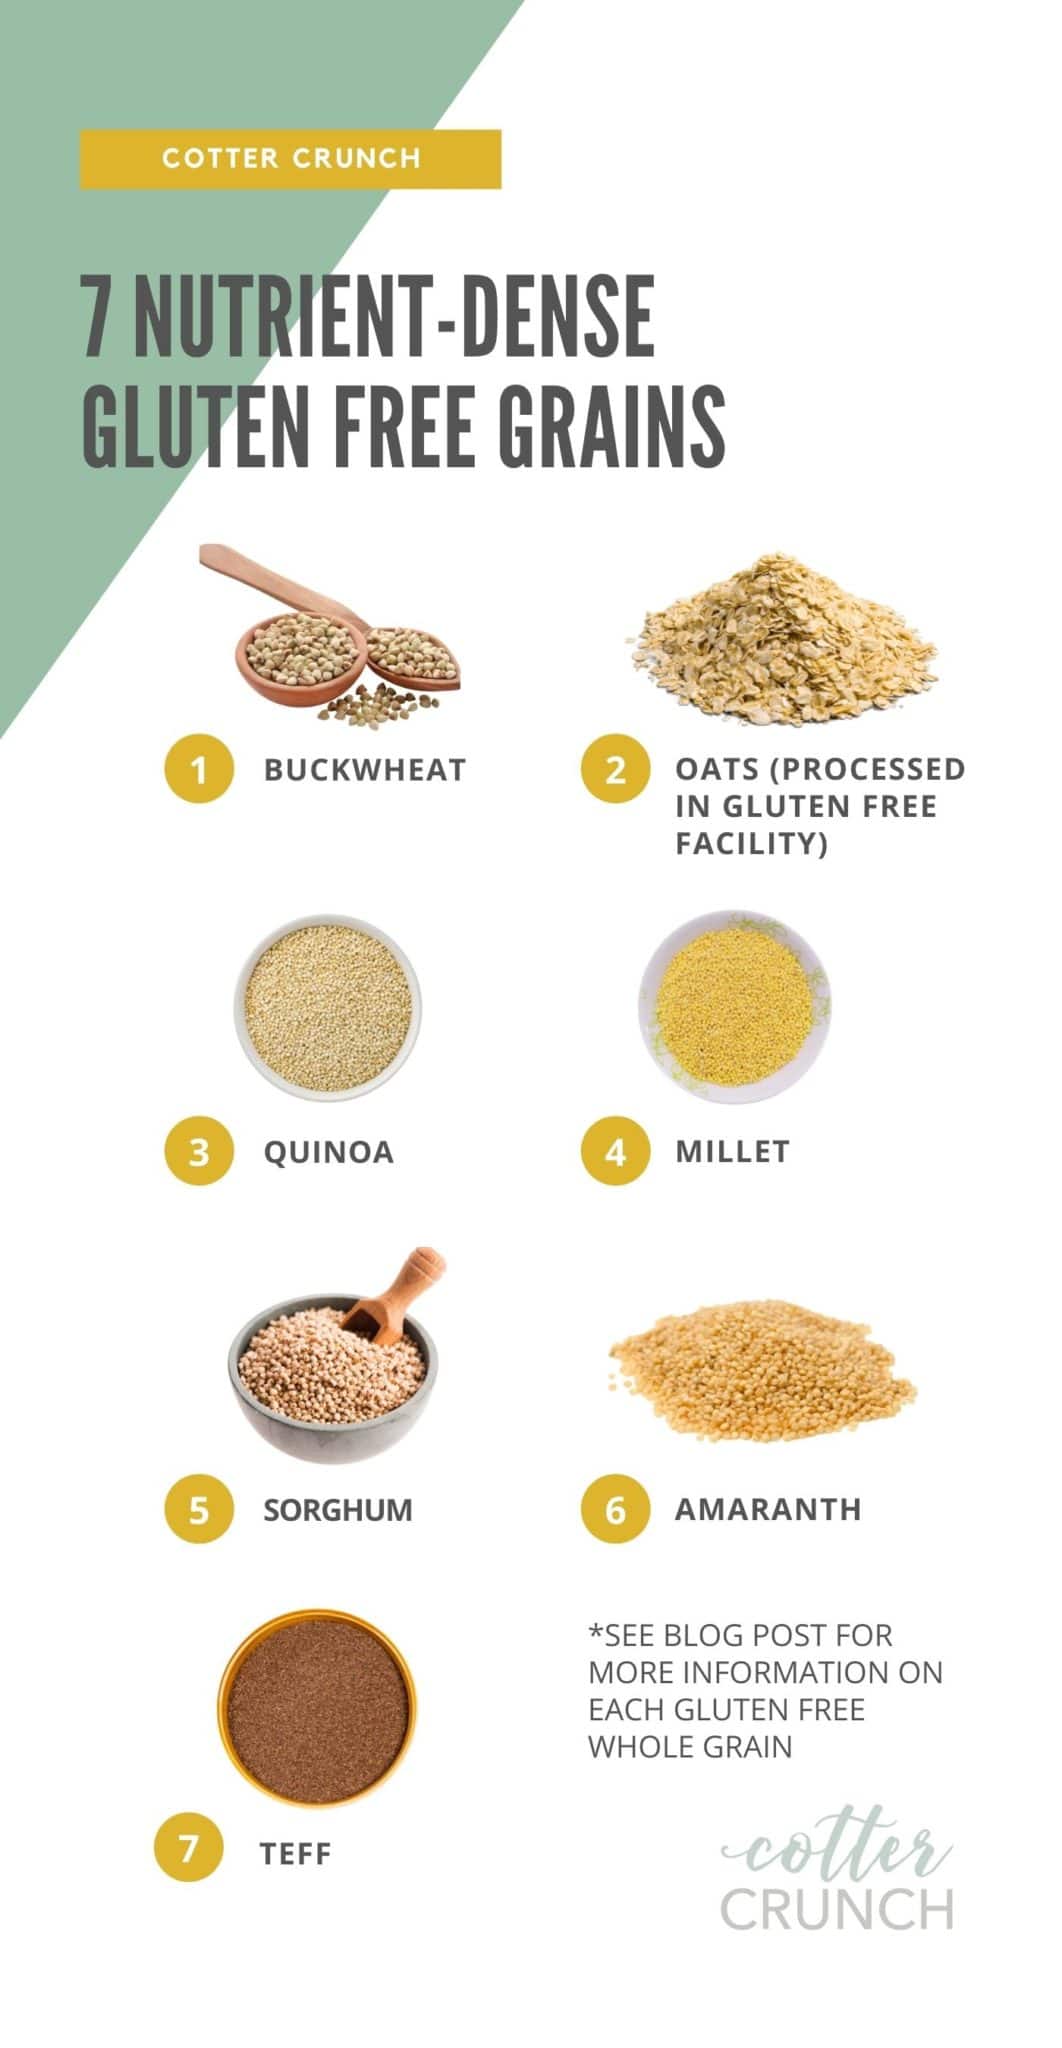 a graphic reading, "7 Nutrient-Dense Gluten Free Grains" with pictures and labels of buckwheat, oats, quinoa, millet, sorghum, amaranth, teff